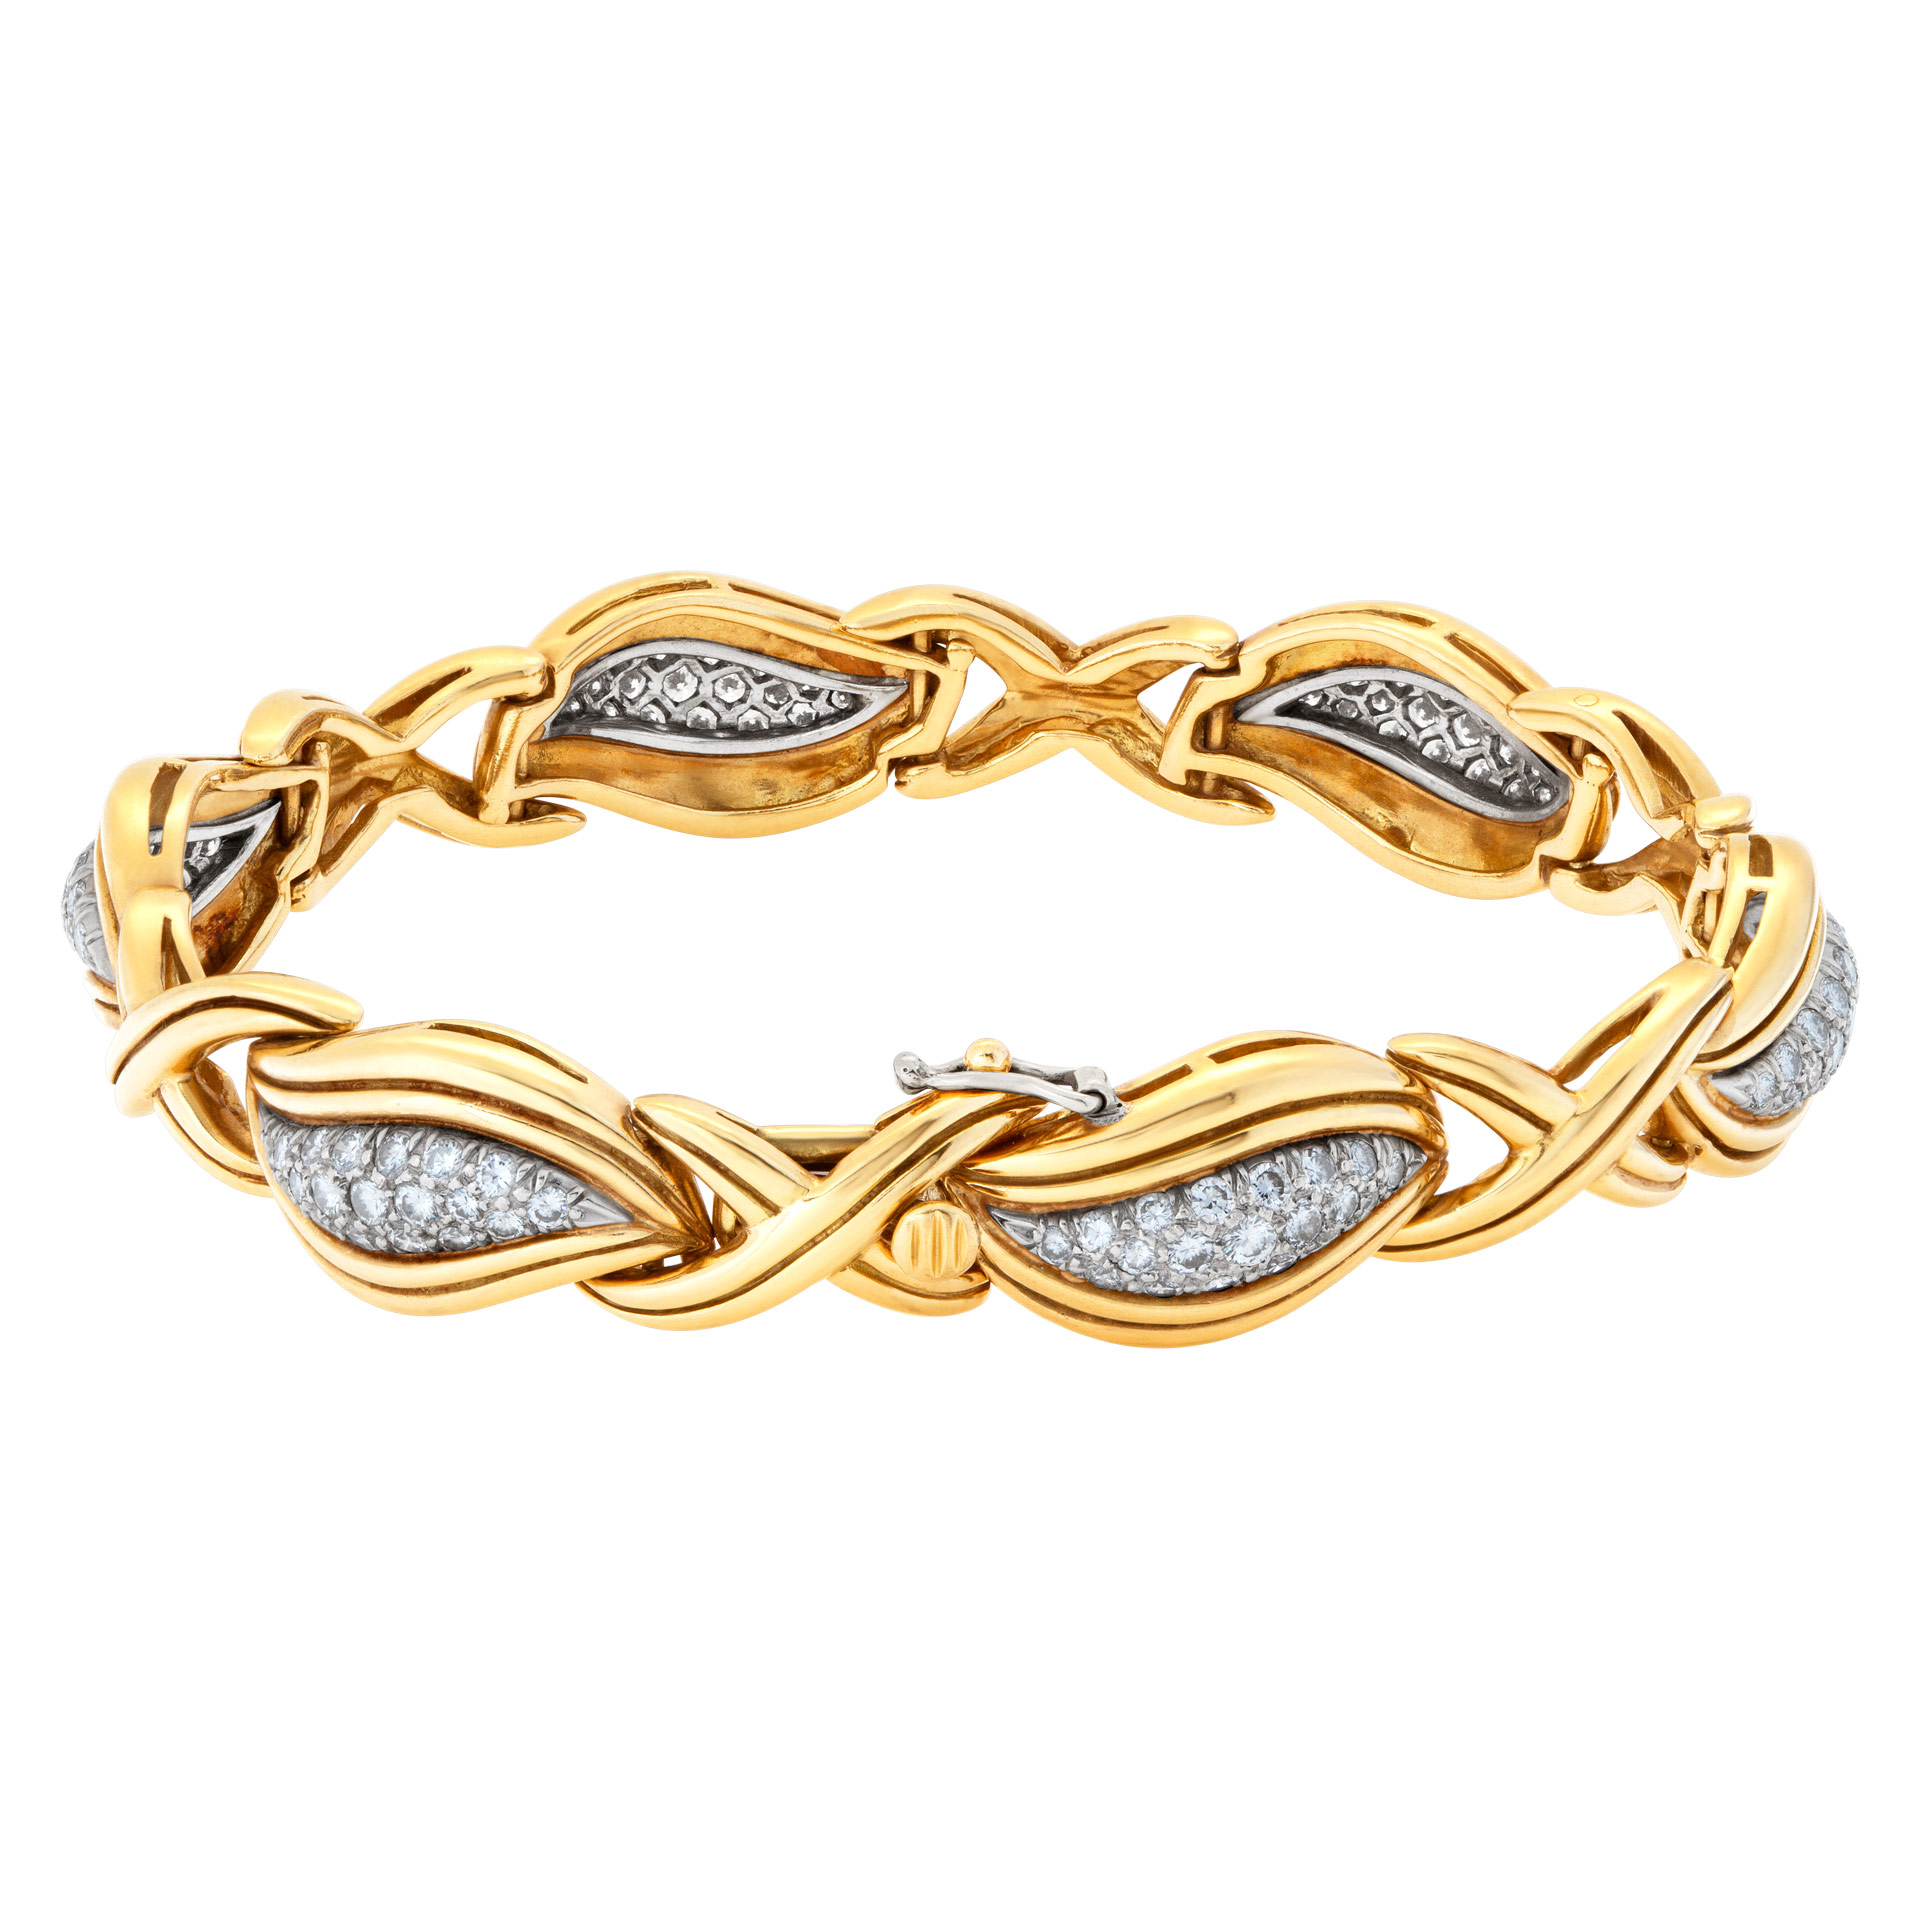 Stylish "Hugs & Kisses" bracelet with over 3.50 carats full cut round brilliant diamonds set in 18K yellow gold.